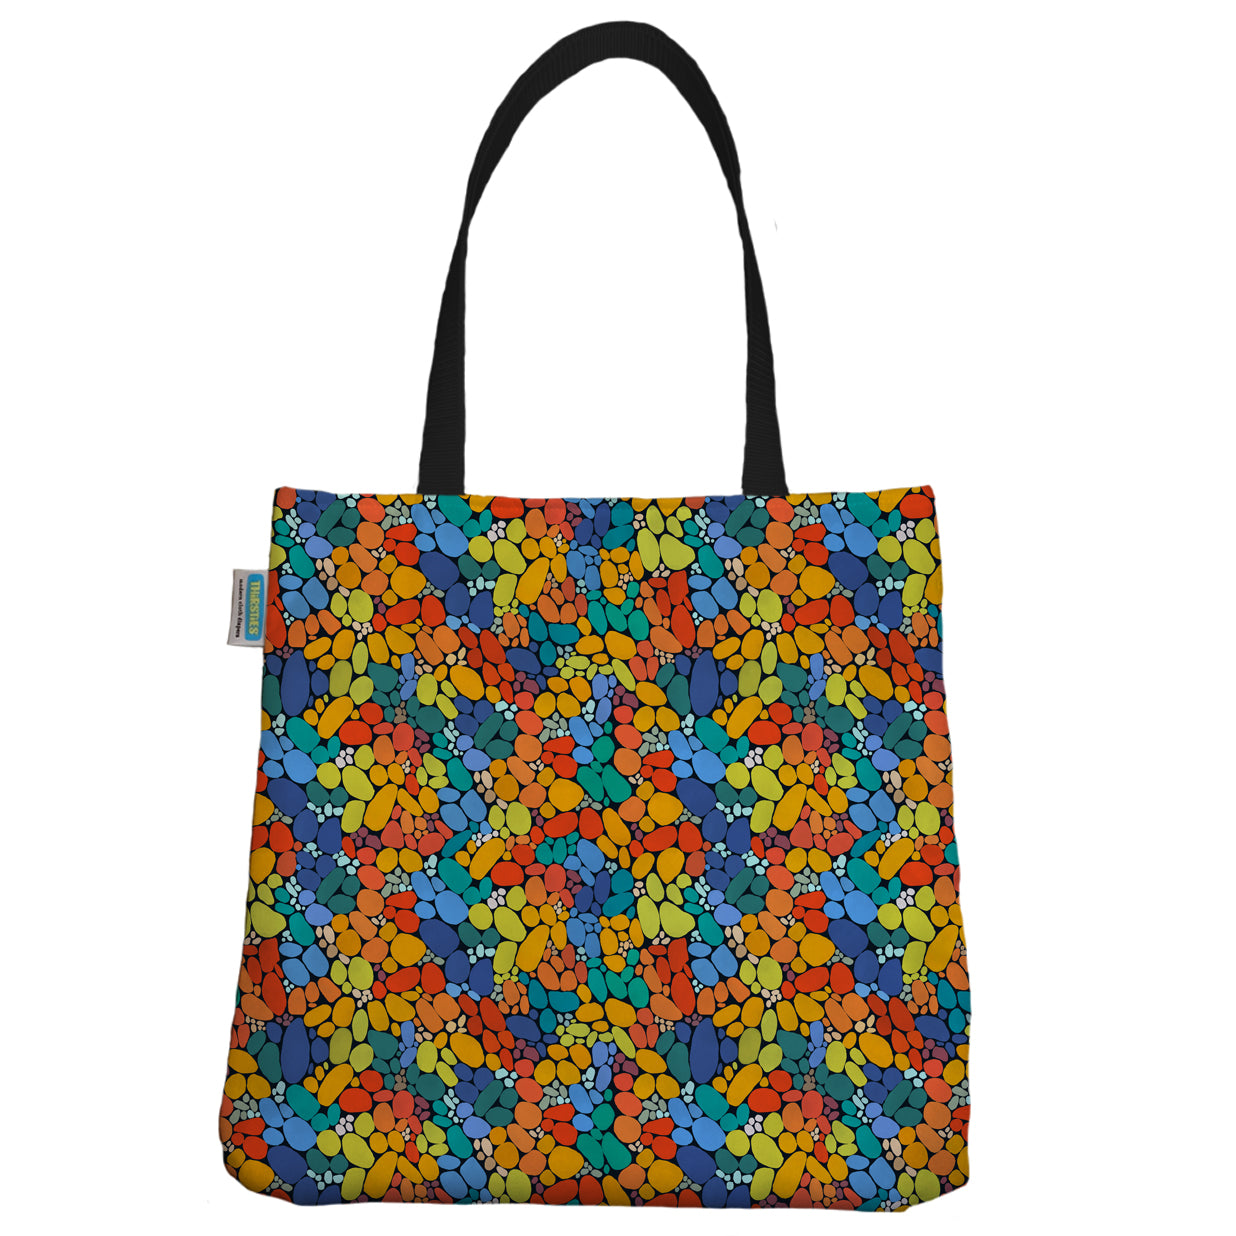 Simple Tote Bag - Stepping Stones